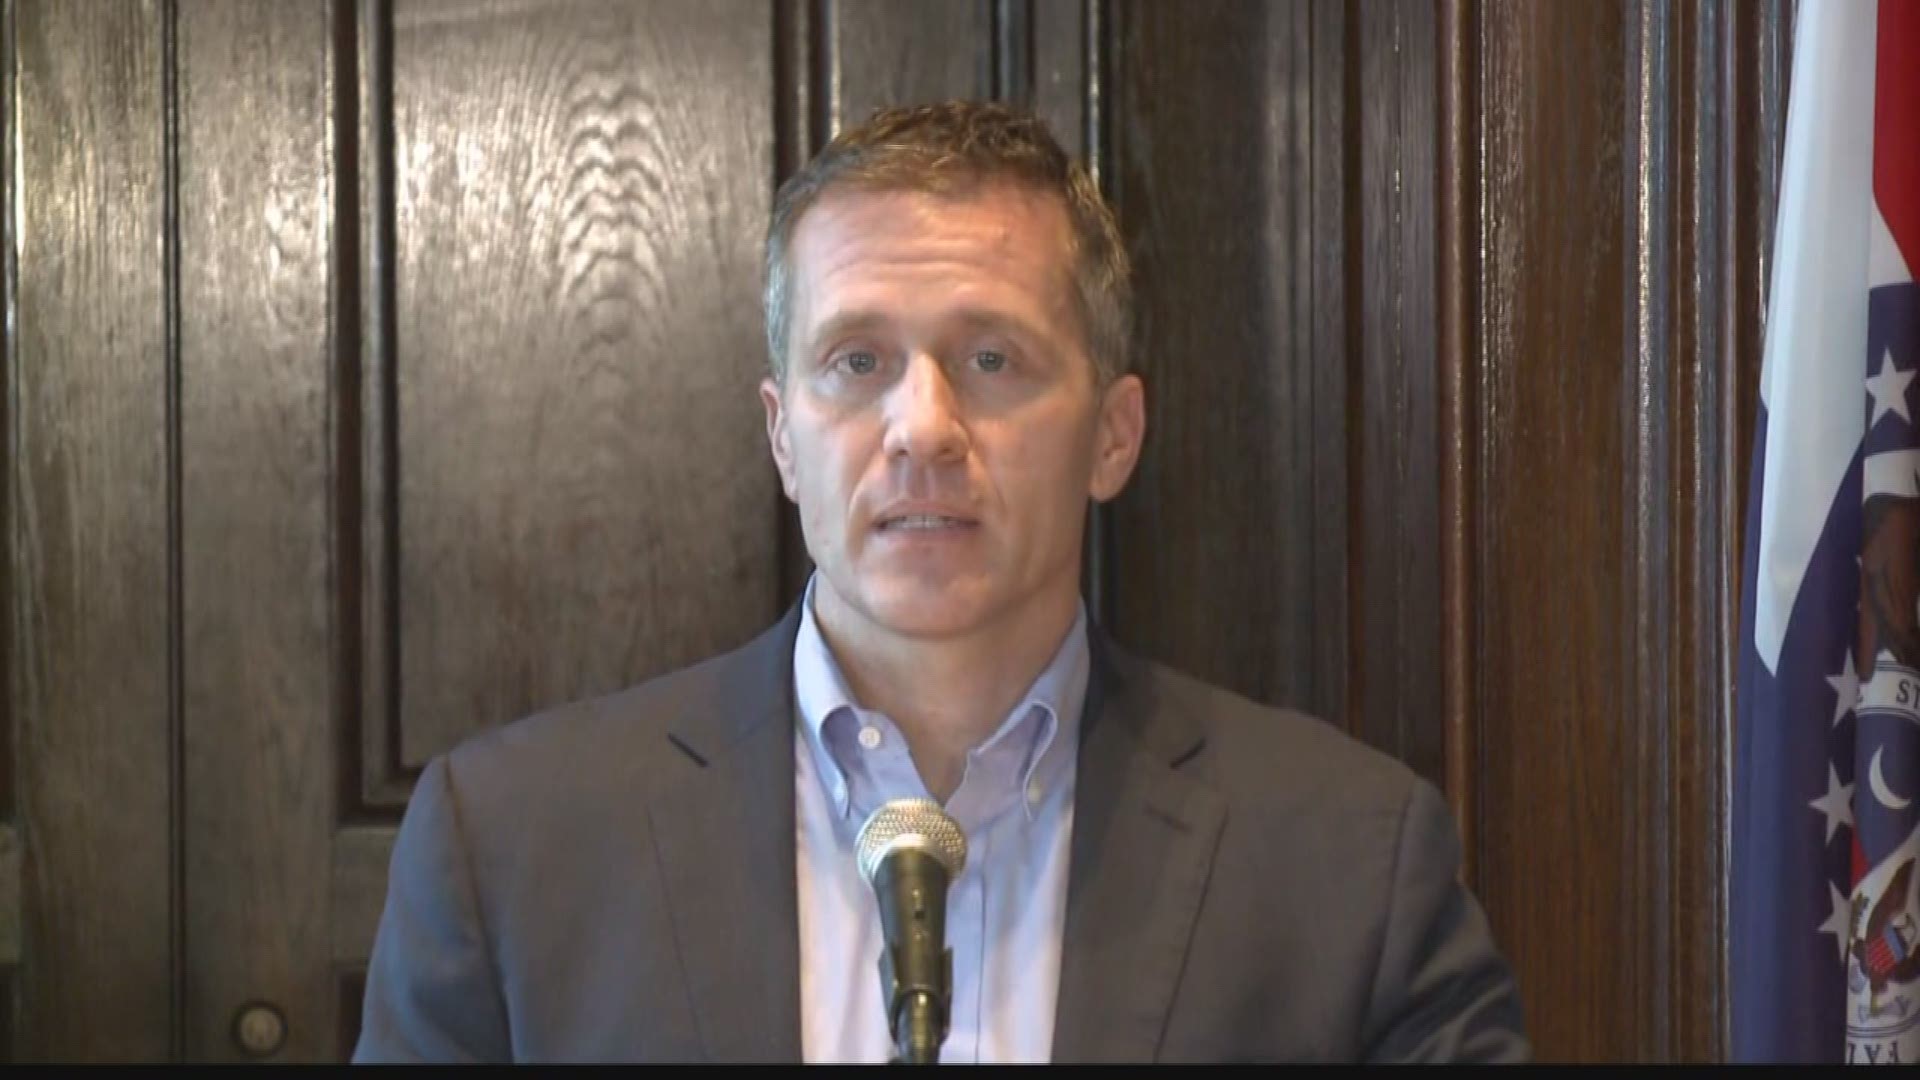 Two of the most prominent politicians in Missouri are calling for Governor Eric Greitens to resign.